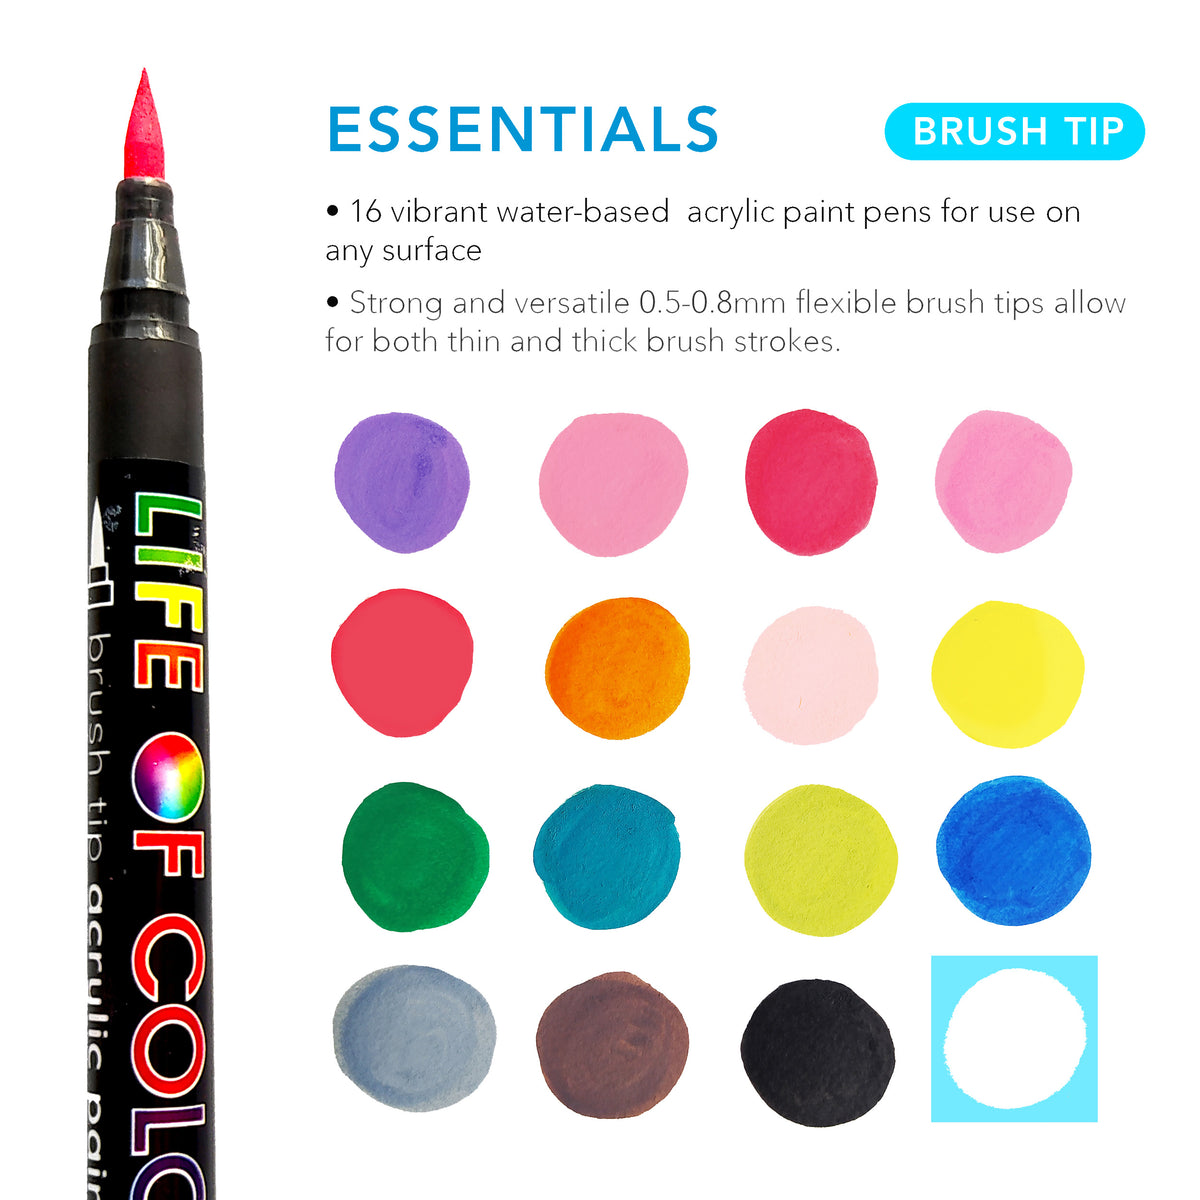 POSCA Pcf-350 Standard Colours Brush Tip 10 Pen Collection for sale online